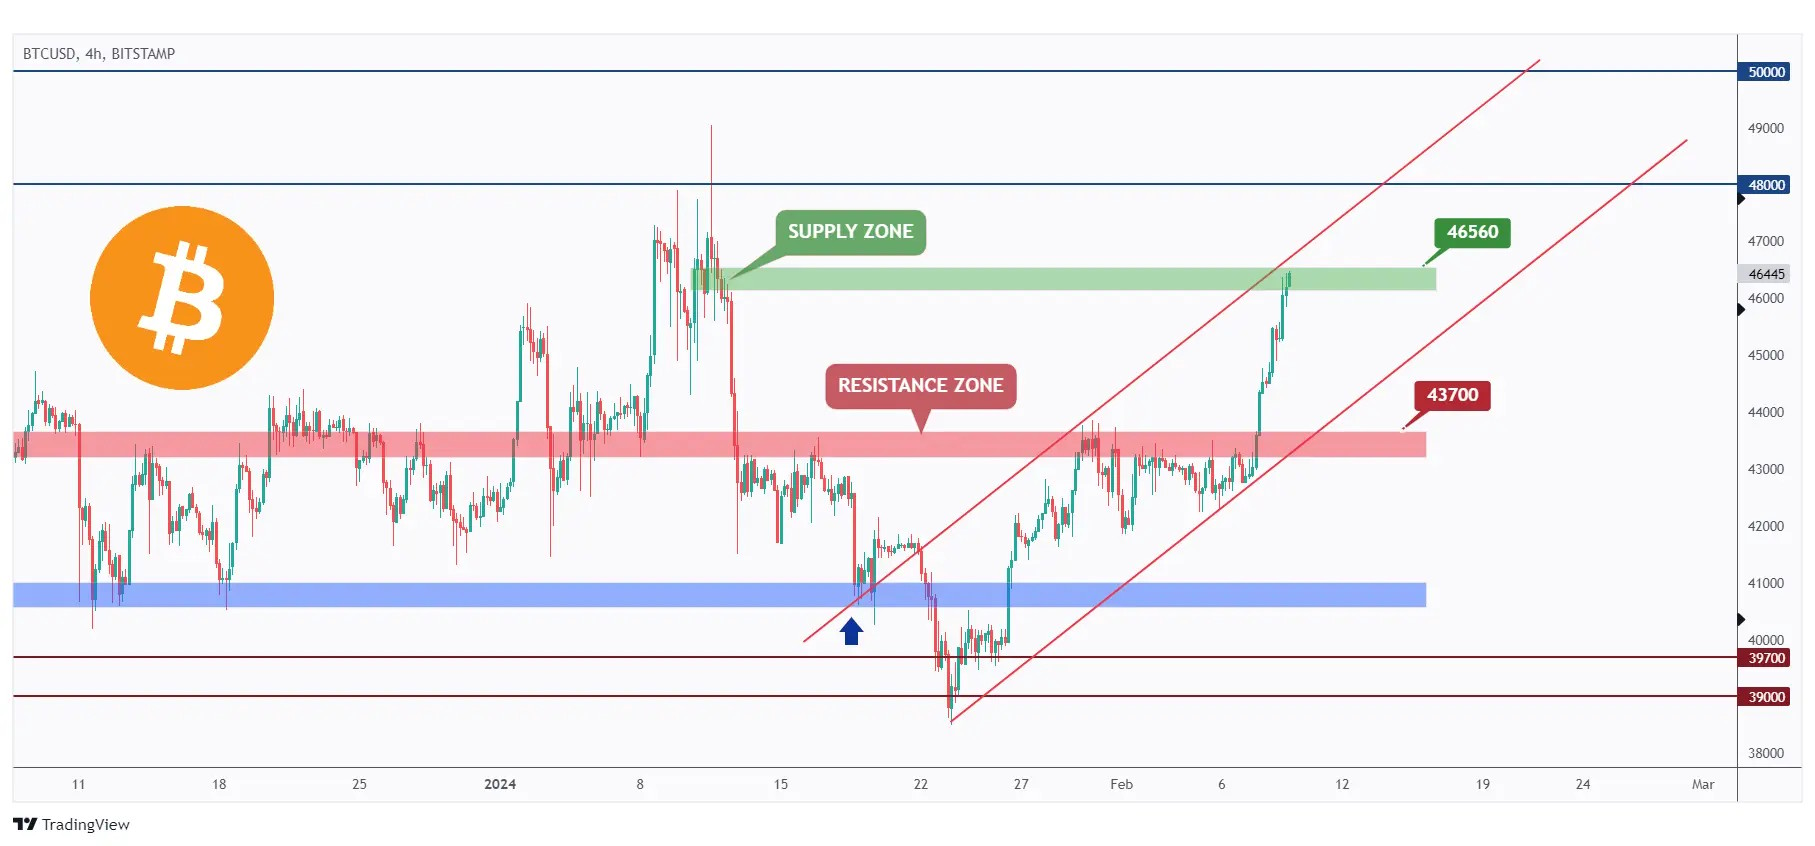 BTC 4h chart overall bullish trading inside a rising channel but approaching a strong supply at $46,560.